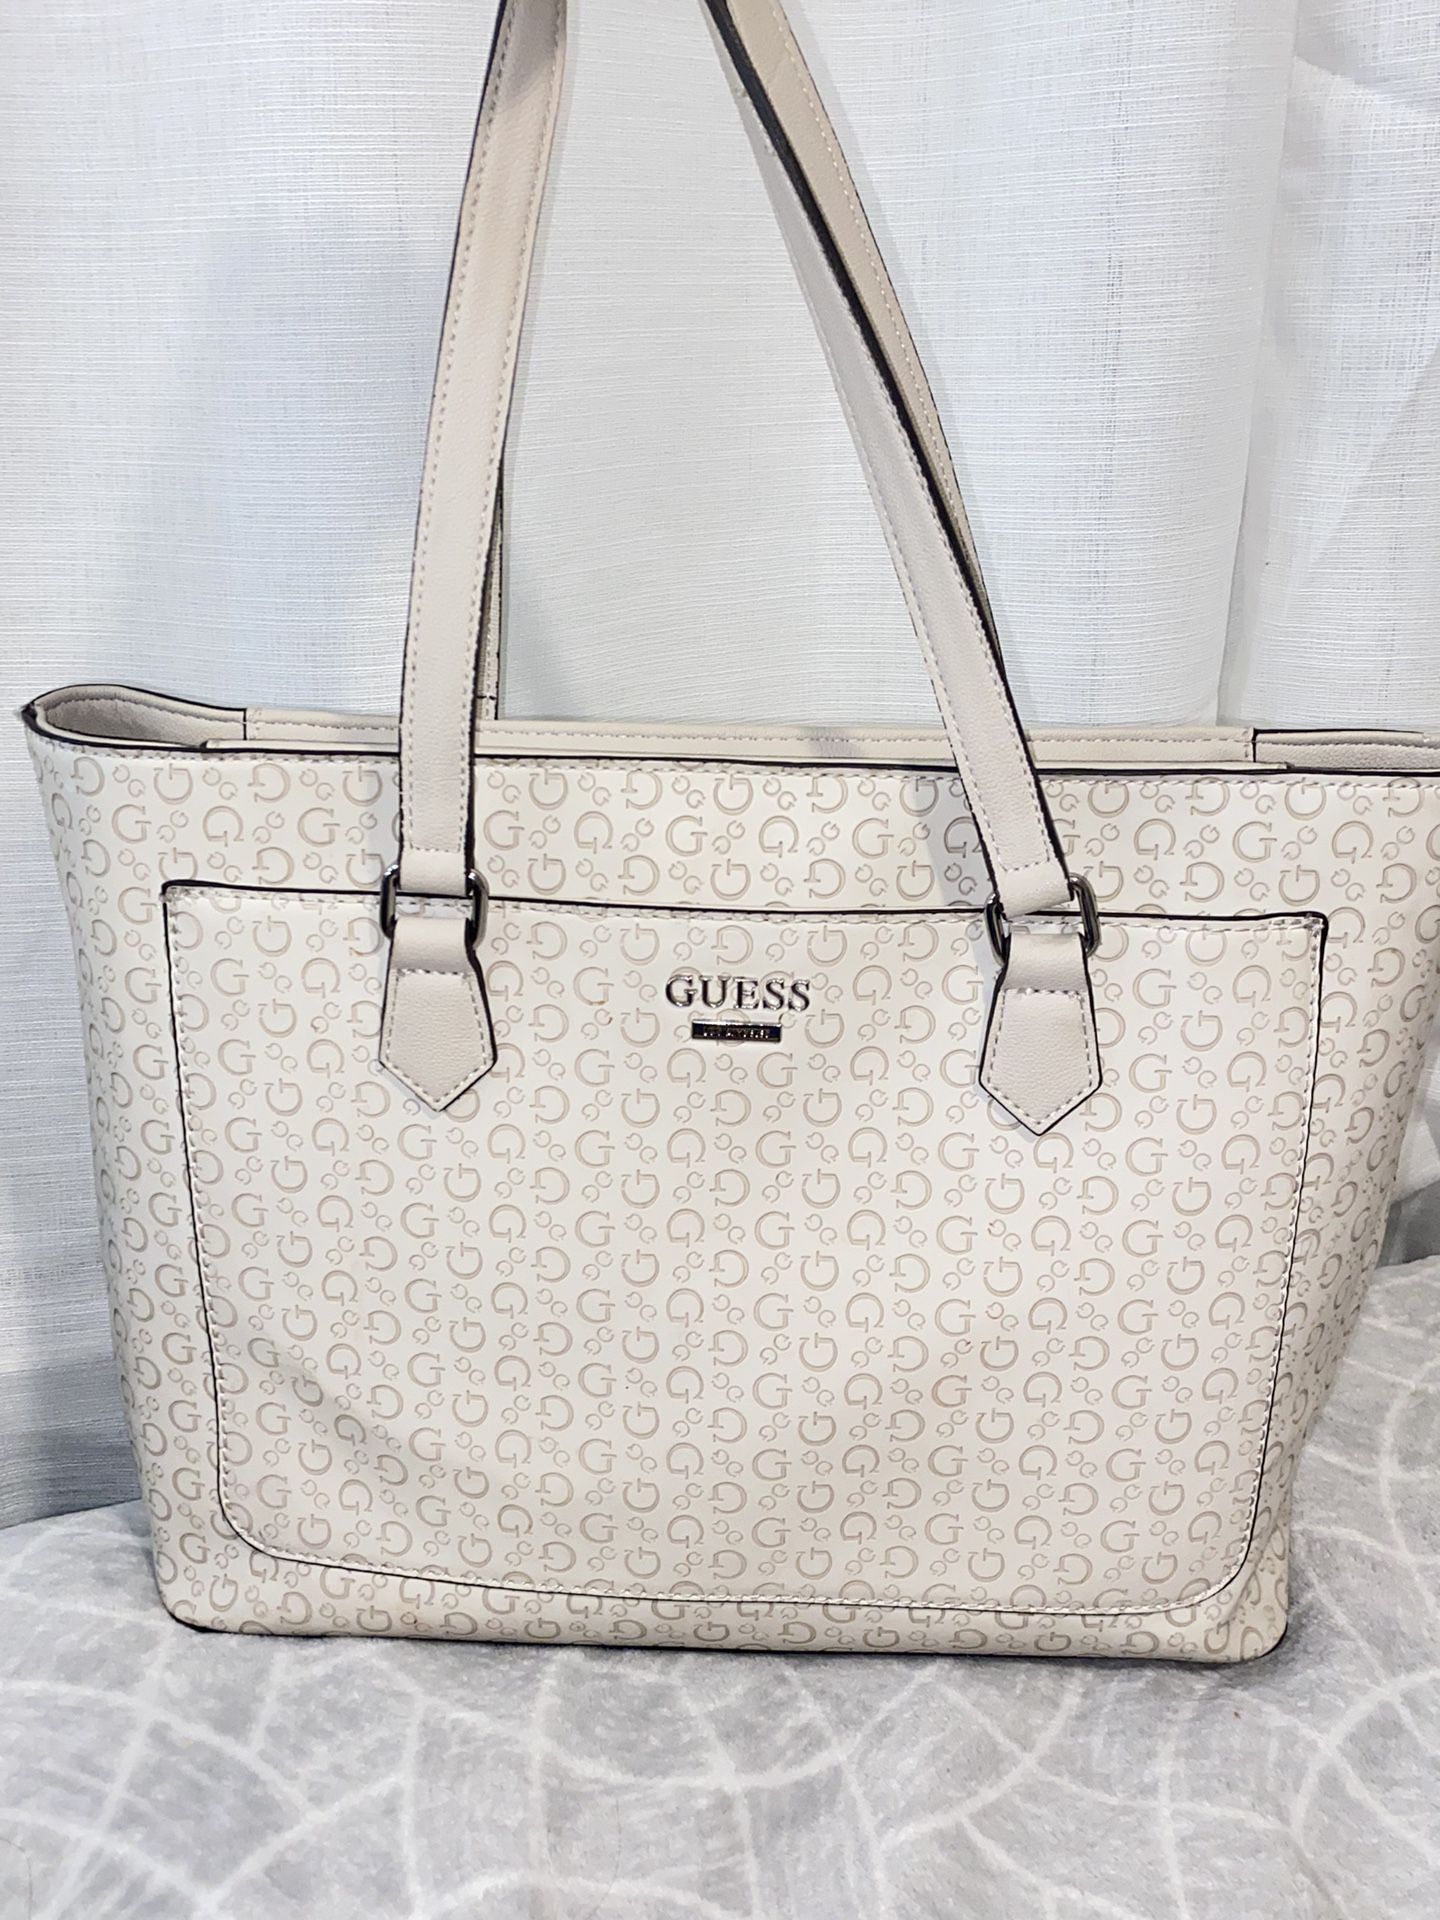 GUESS Totes, Bags